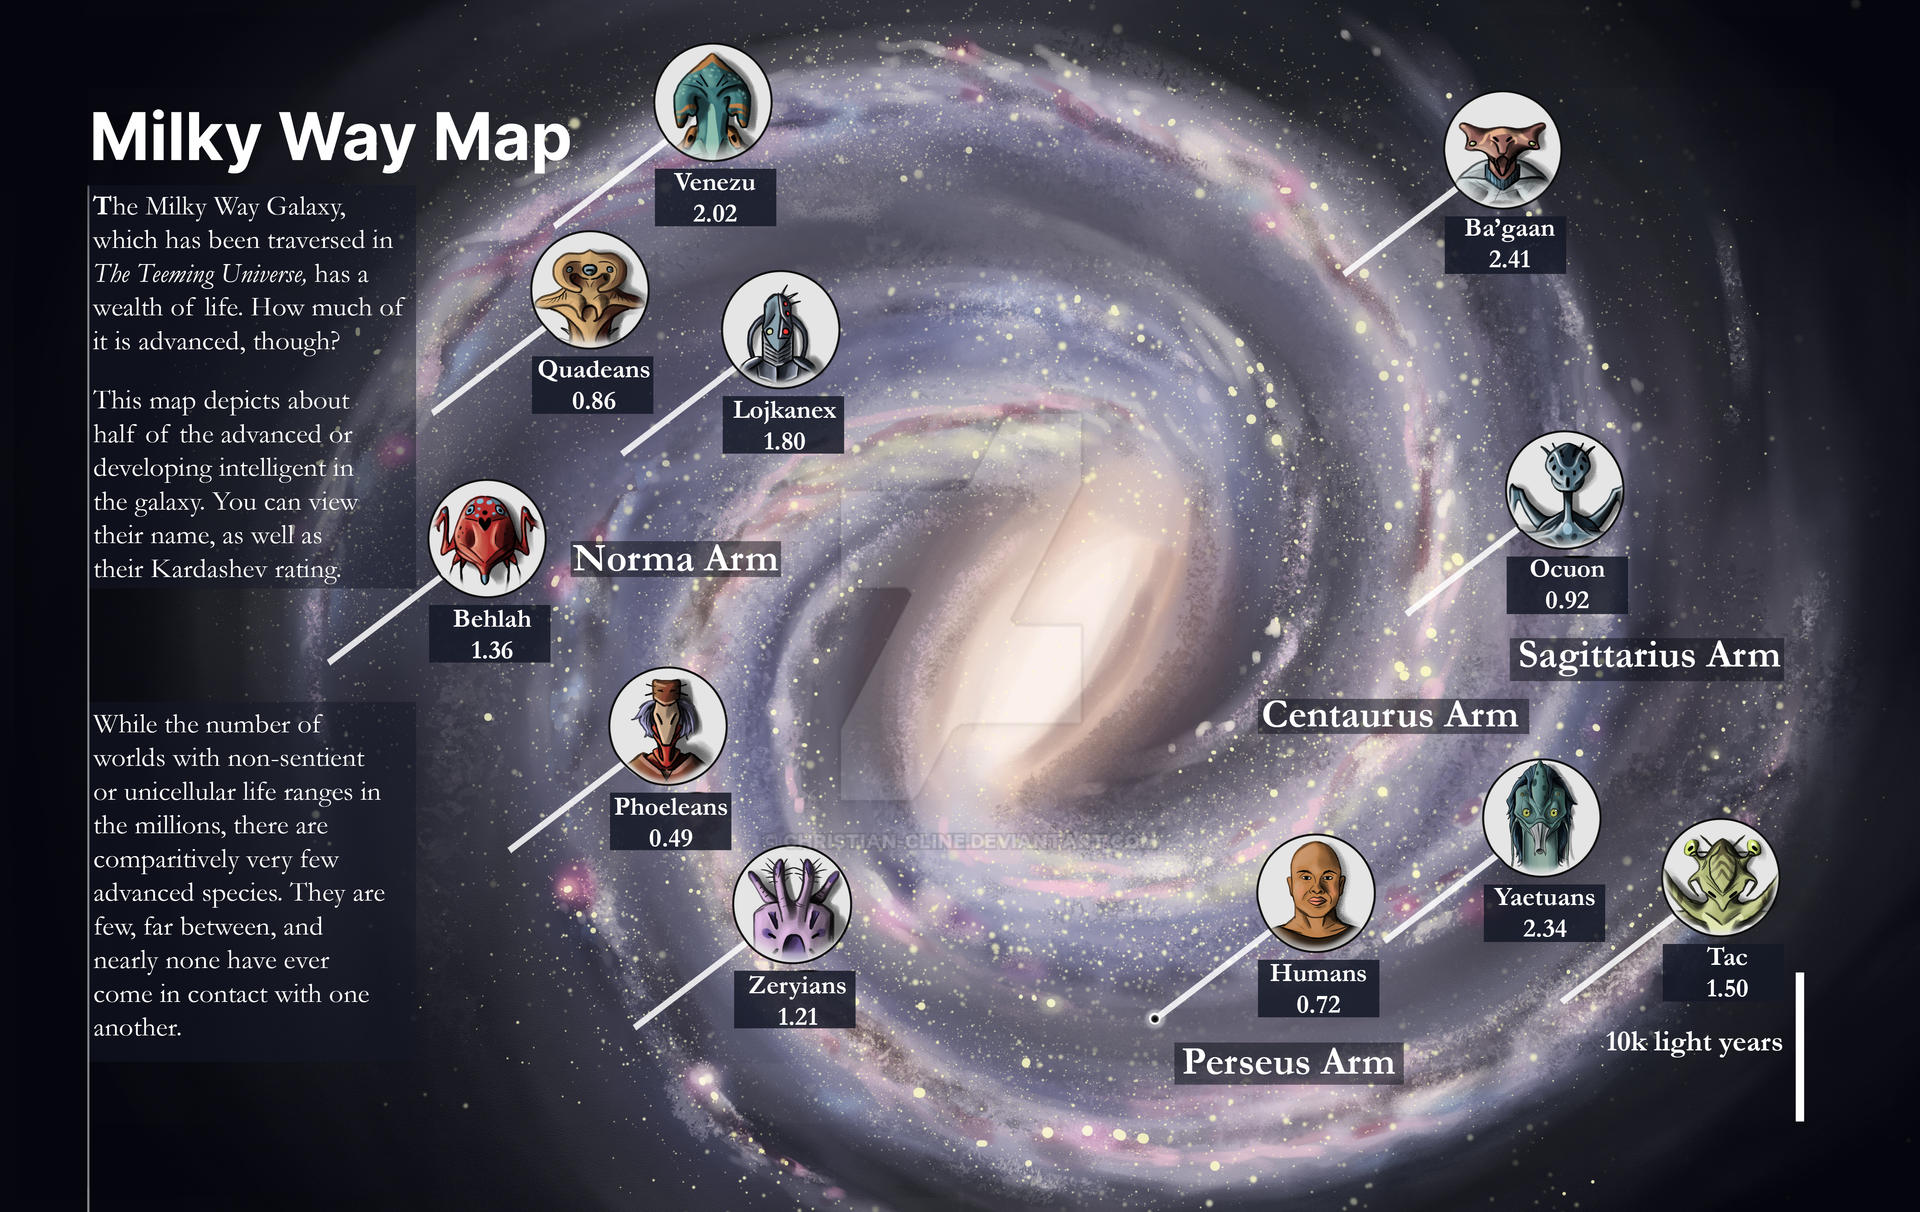 Map of the Milky Way by Christian-Cline on DeviantArt